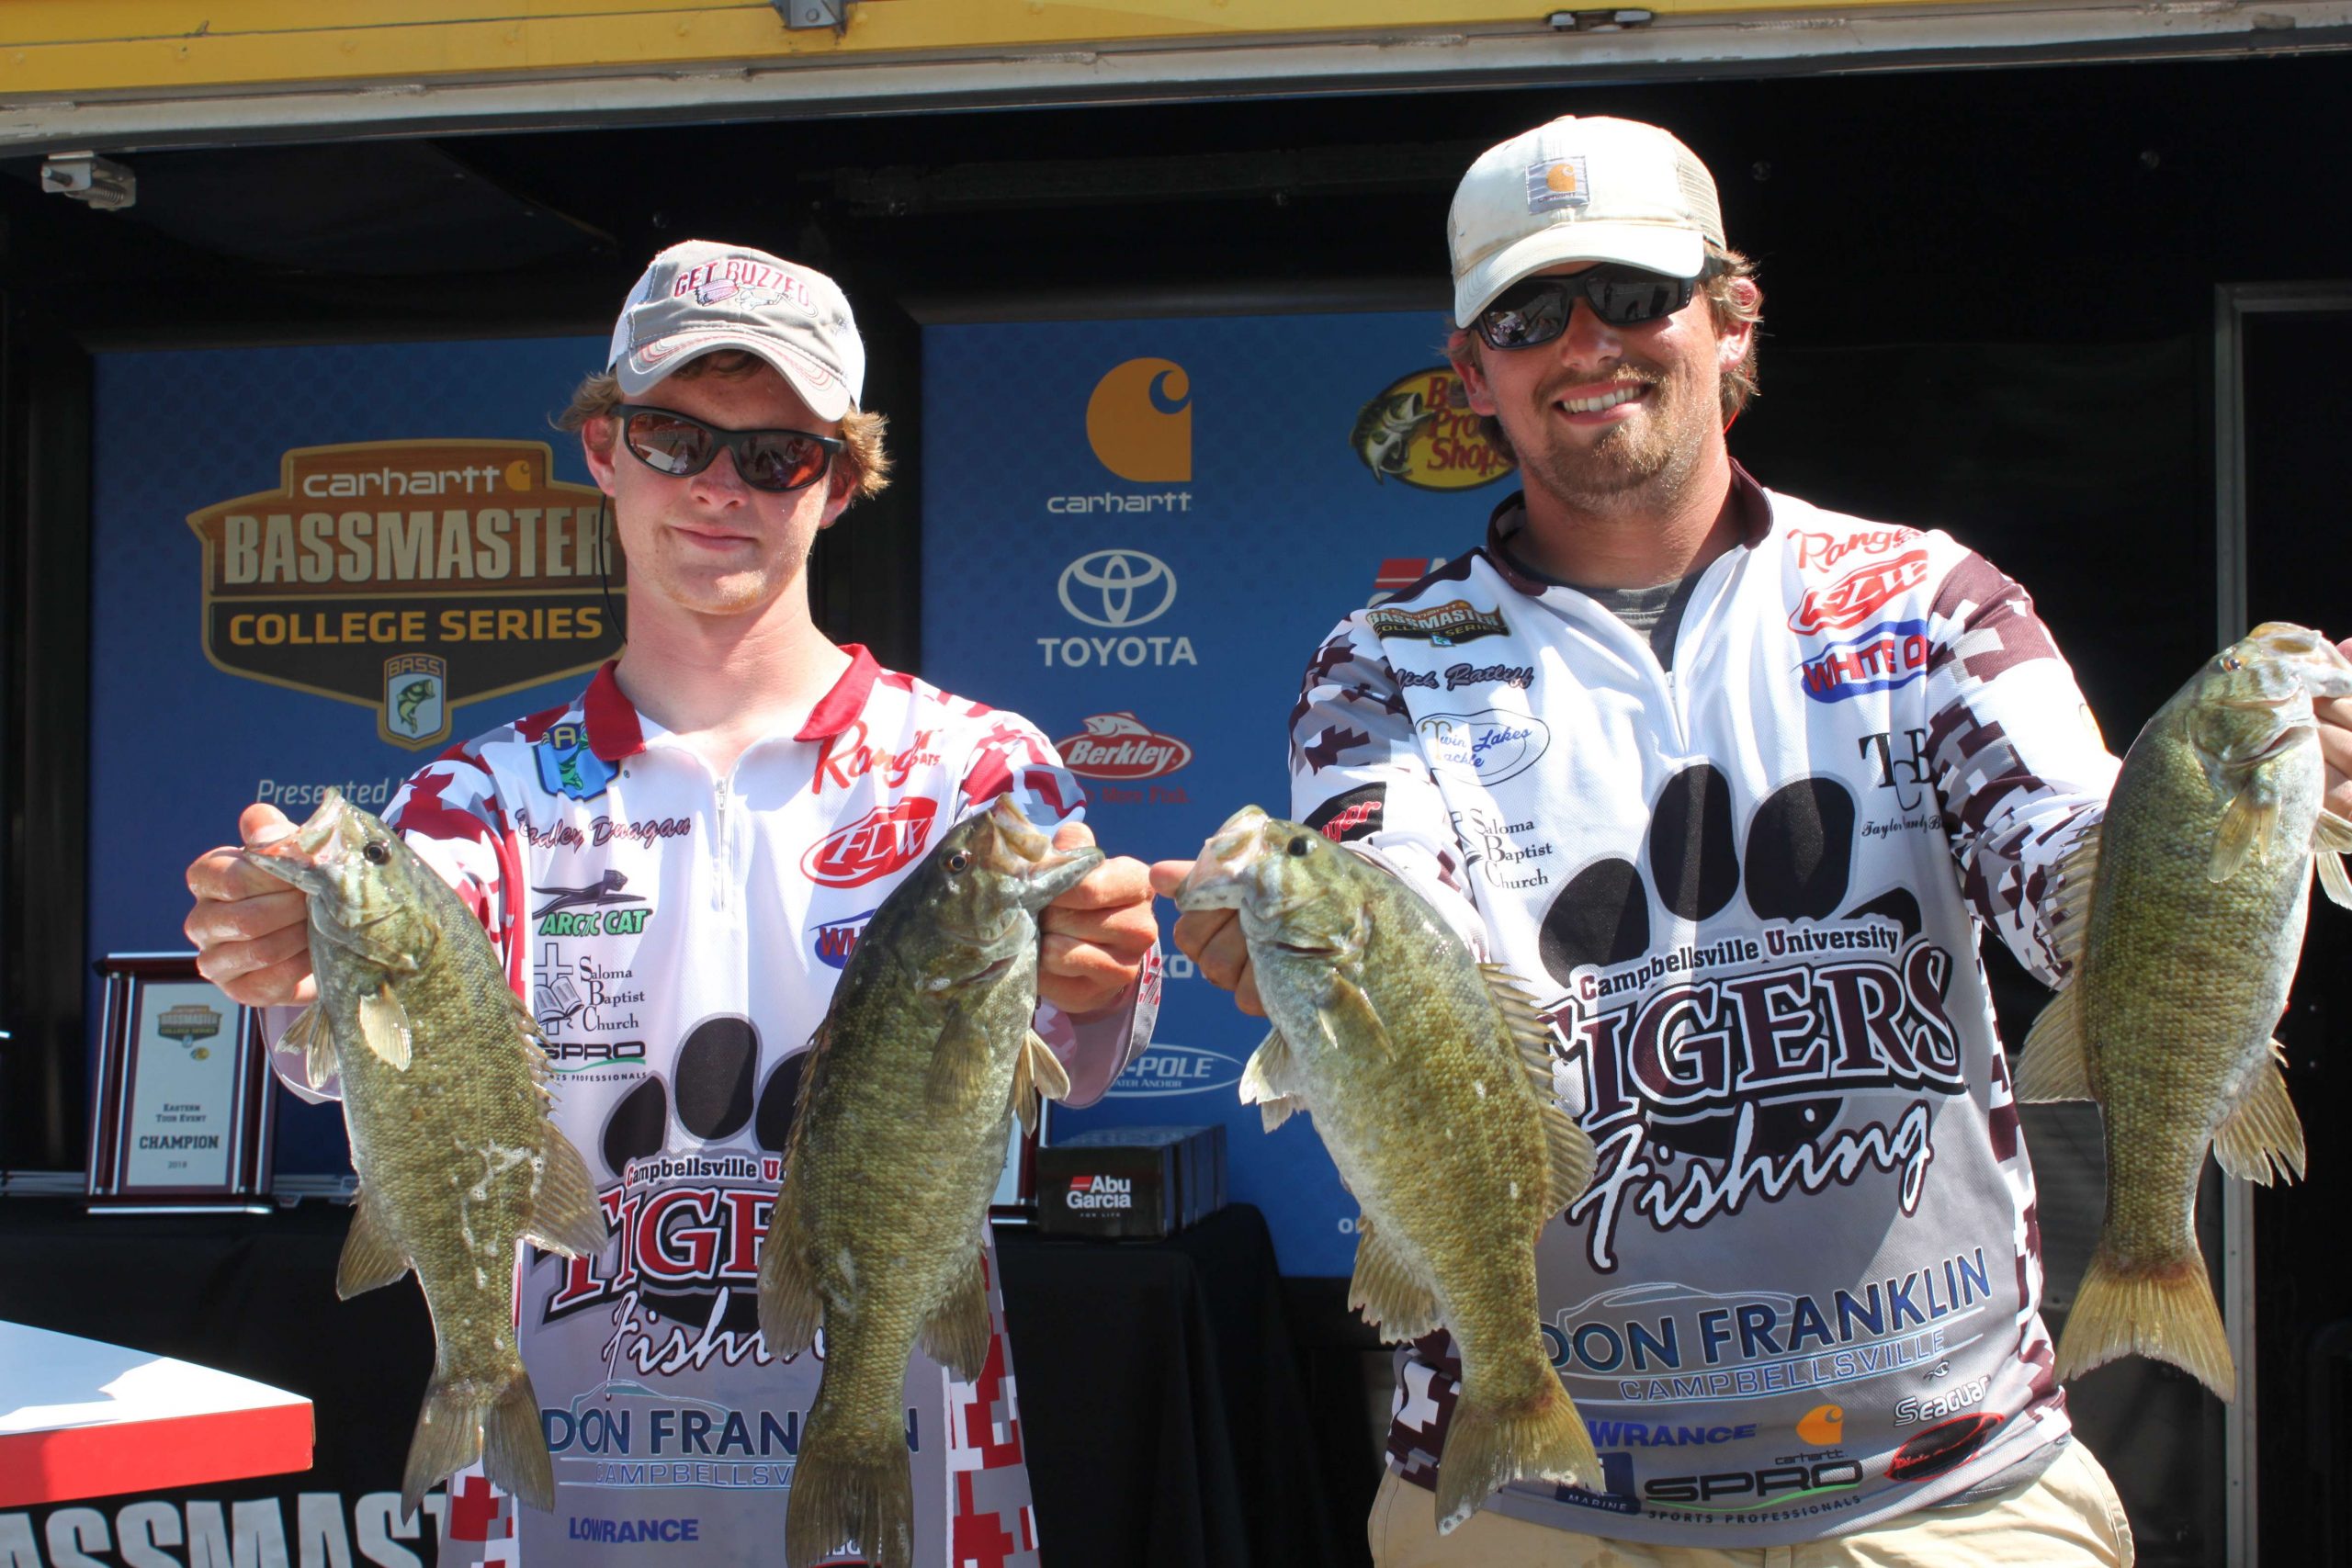 Bradley Dunagan and Nick Ratliff of Campbellsville University finished 29th with 30-15.